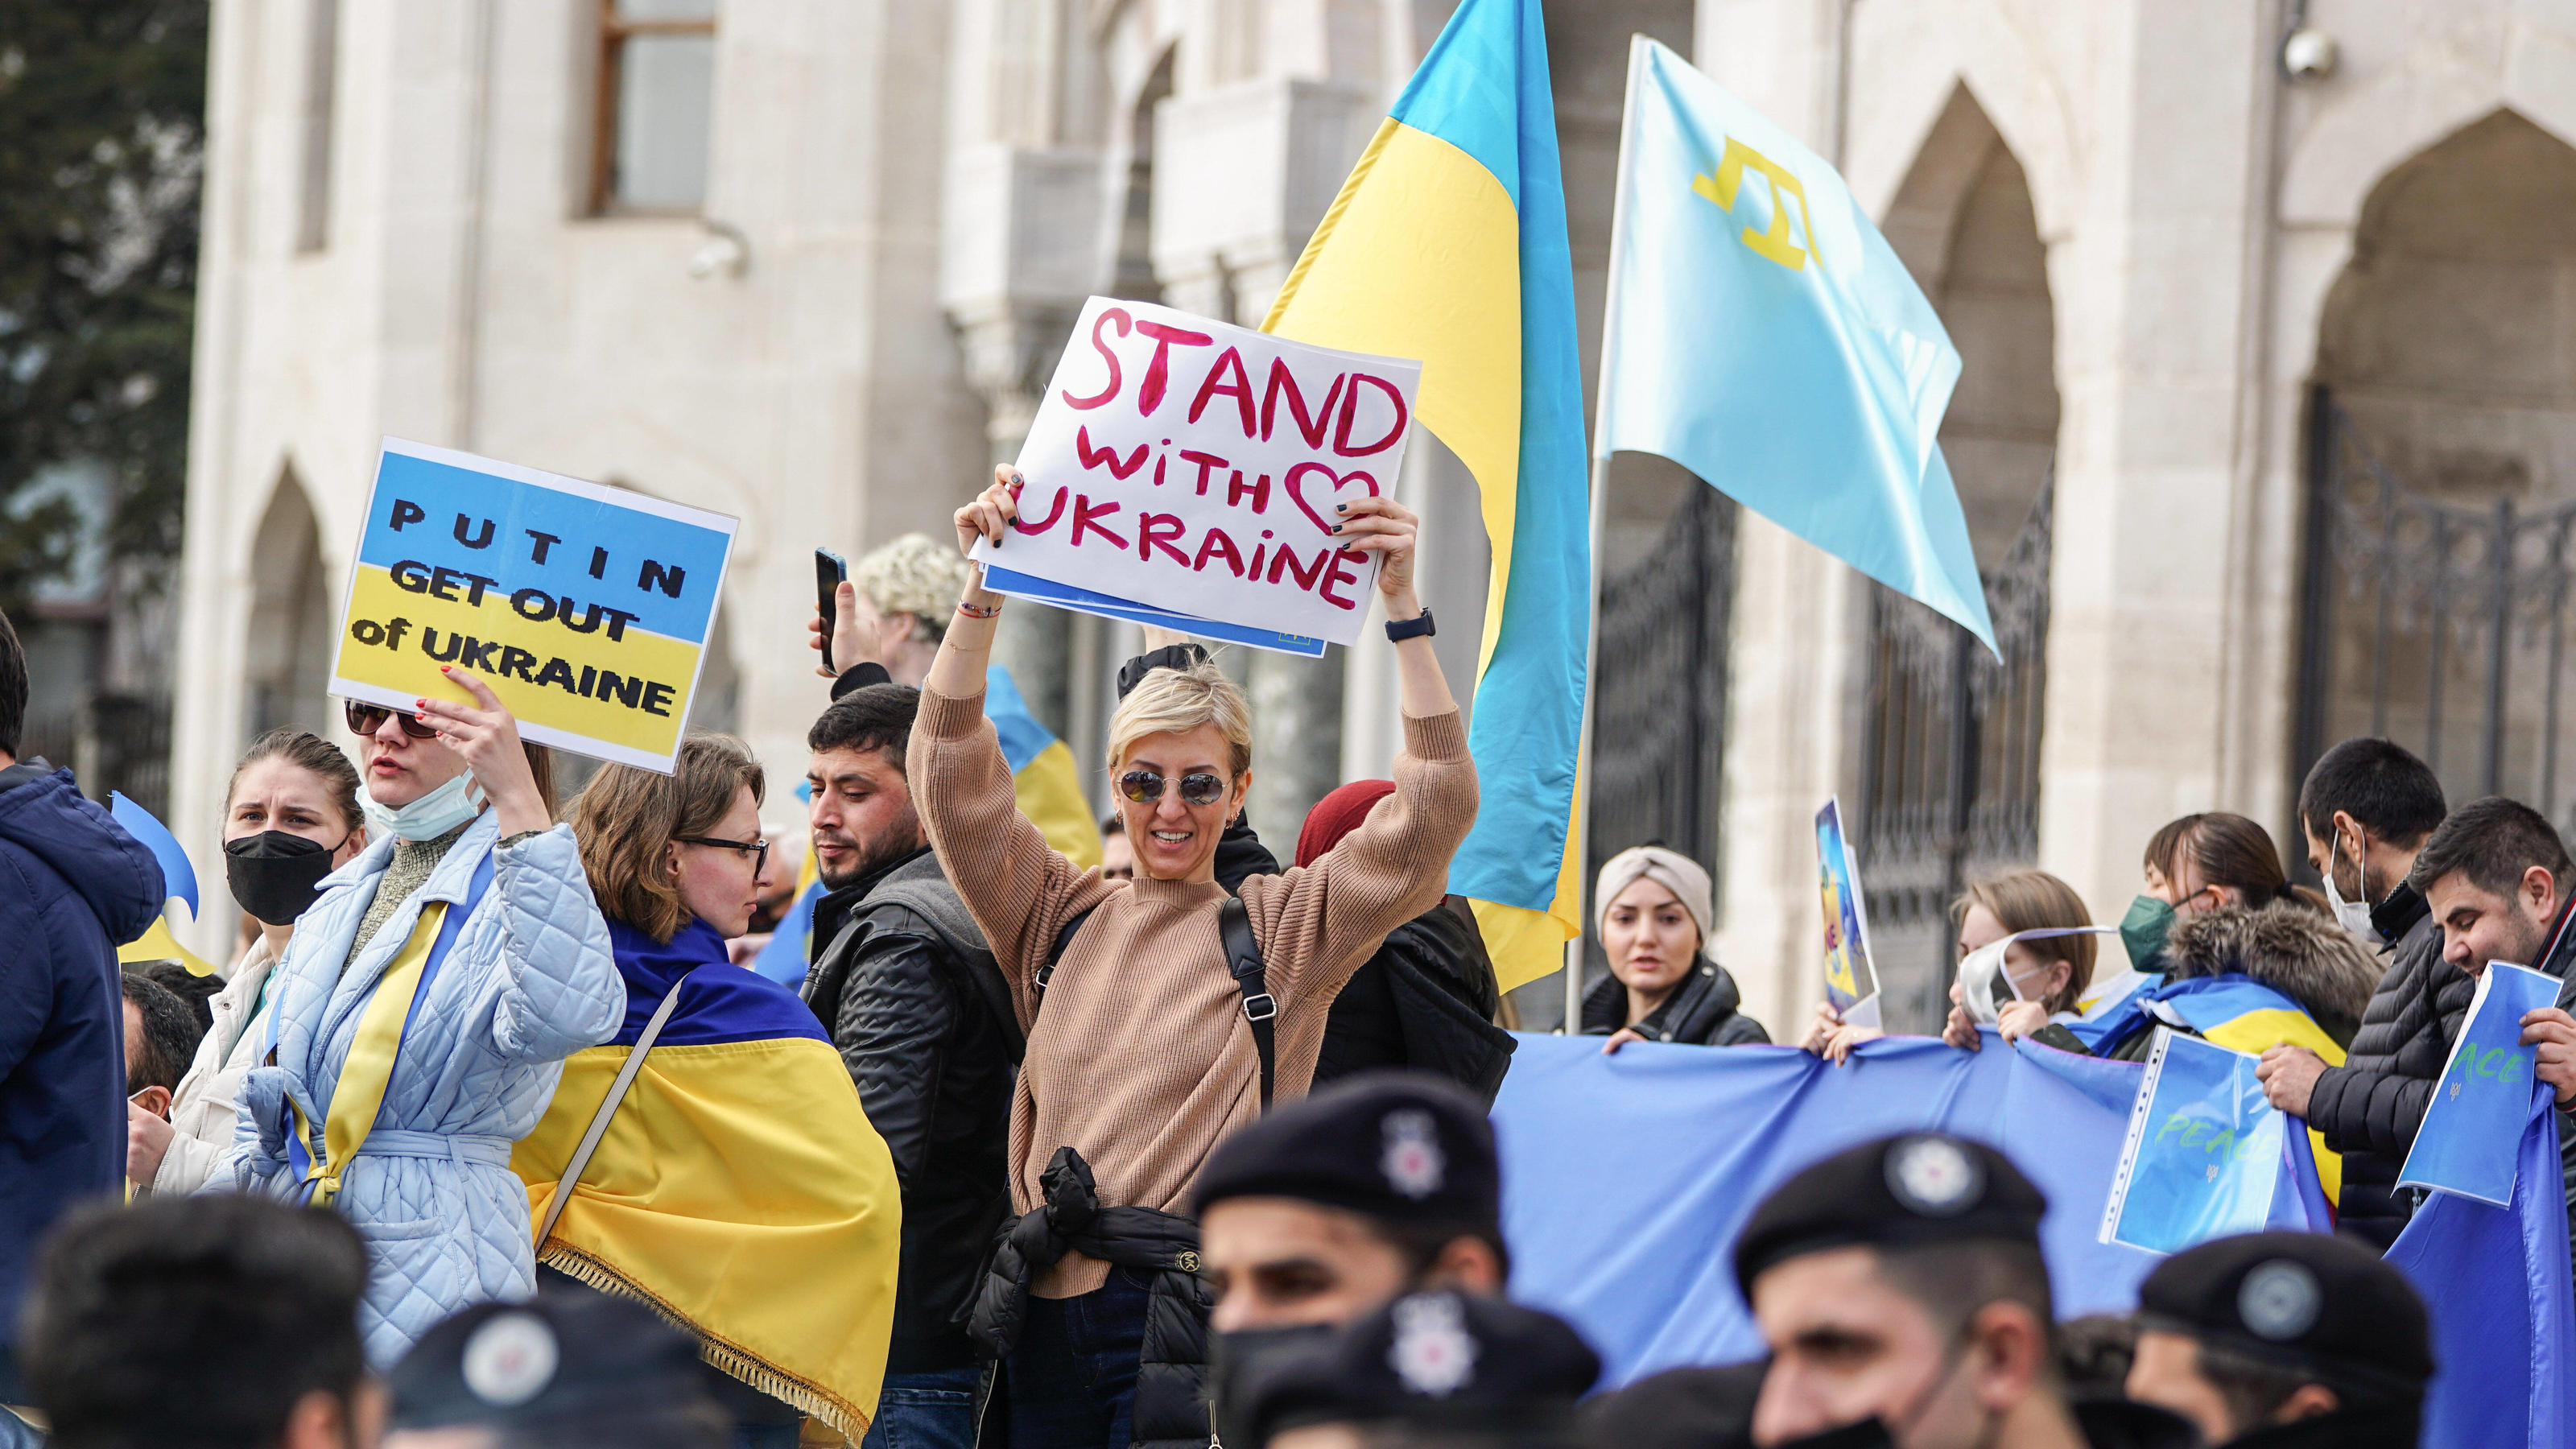 February 26, 2022, Istanbul, Turkey: A woman holds a placard saying stand with Ukraine during the demonstration..Ukrainians gathered to protest against Russia s invasion of Ukraine in Istanbul, Turkey. Explosions and gunfire were reported around Kyiv